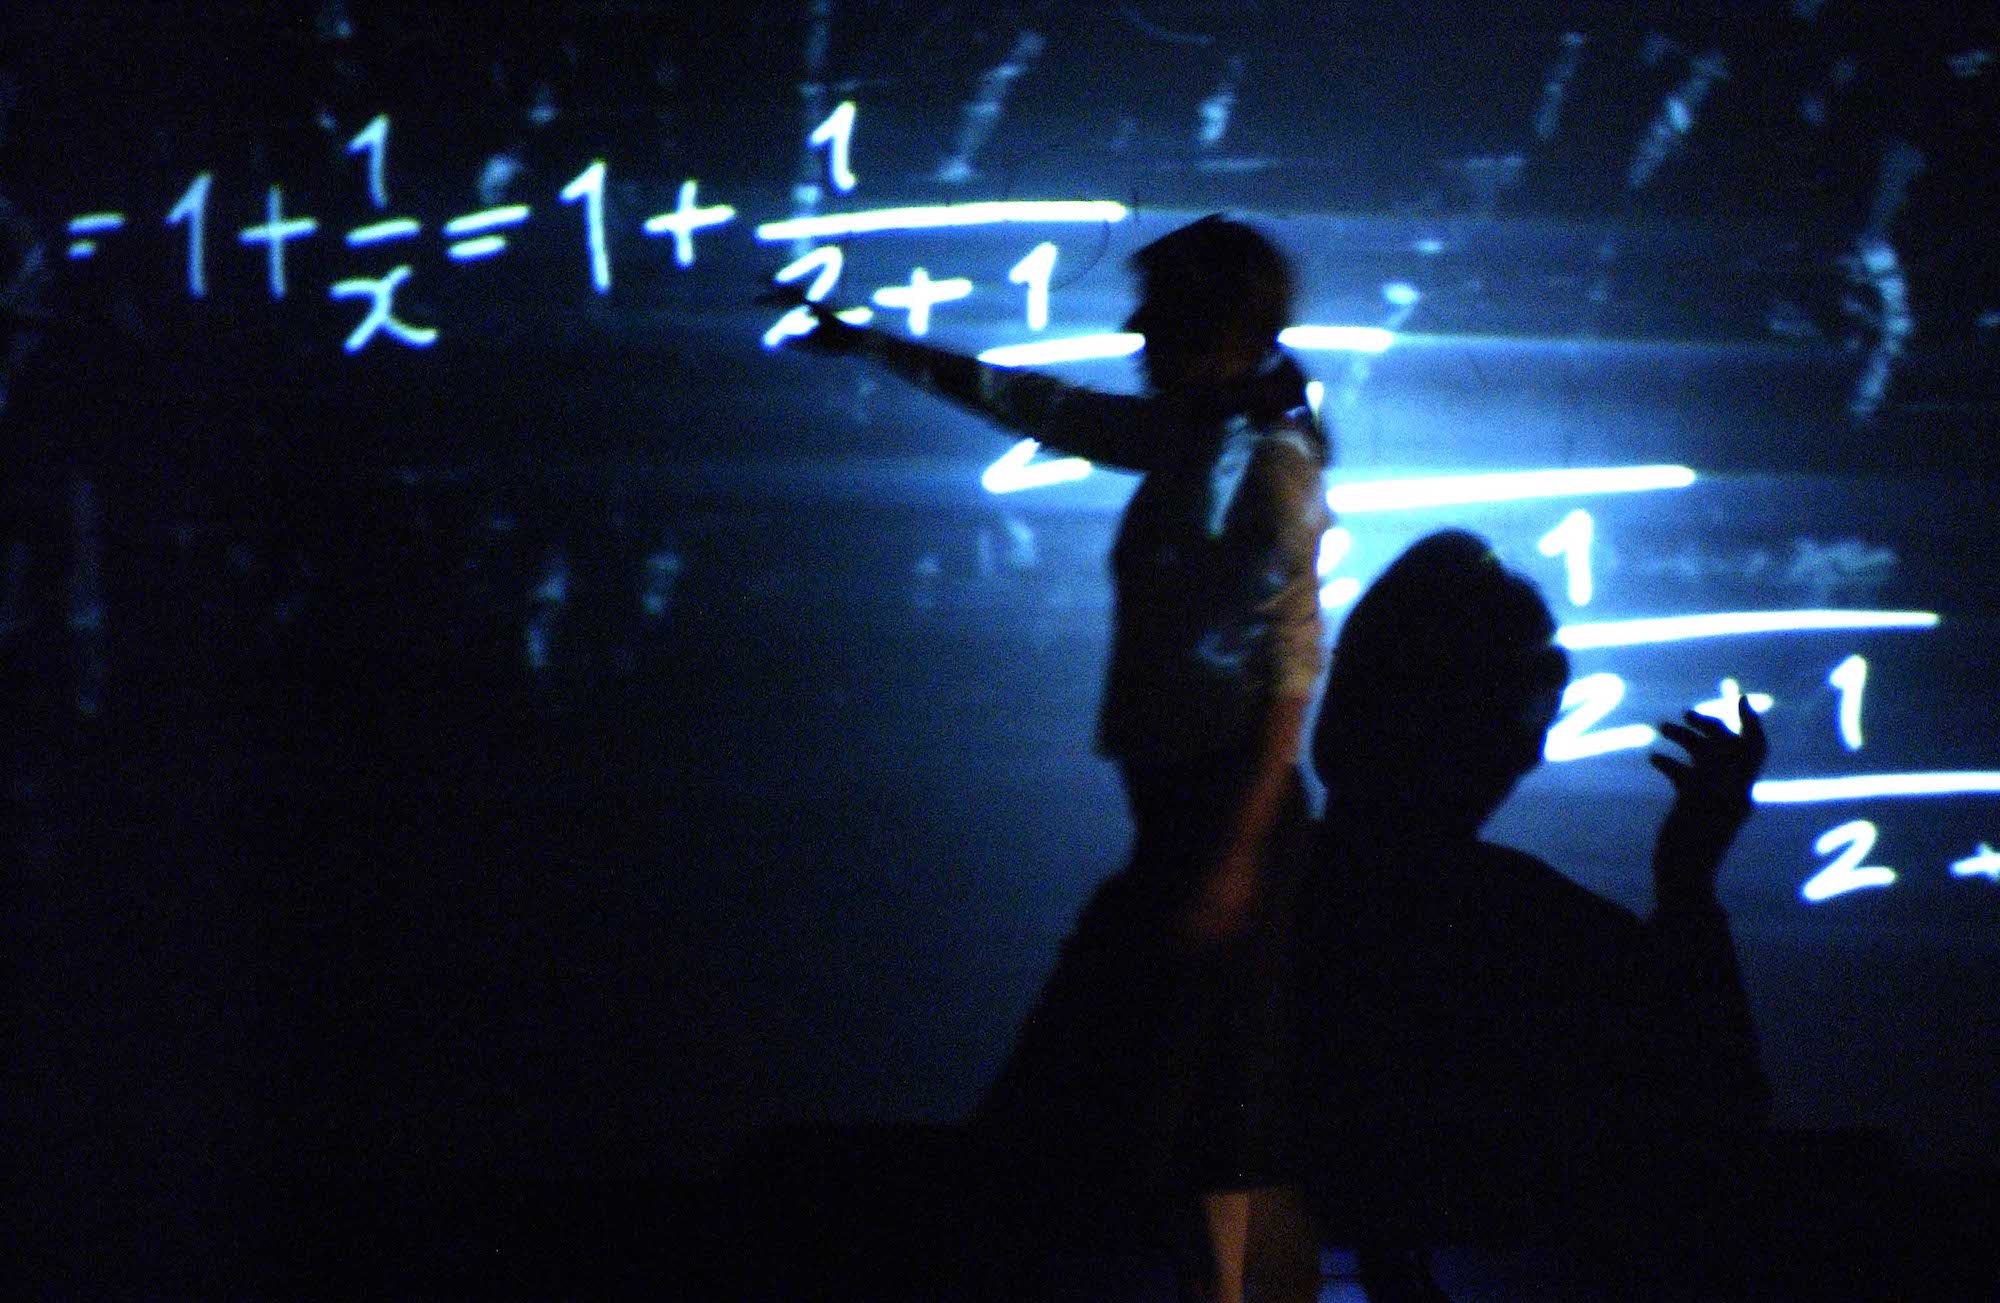 Two shadowy figures discuss the mathematical theorems projected onto the walls behind them in a blue light